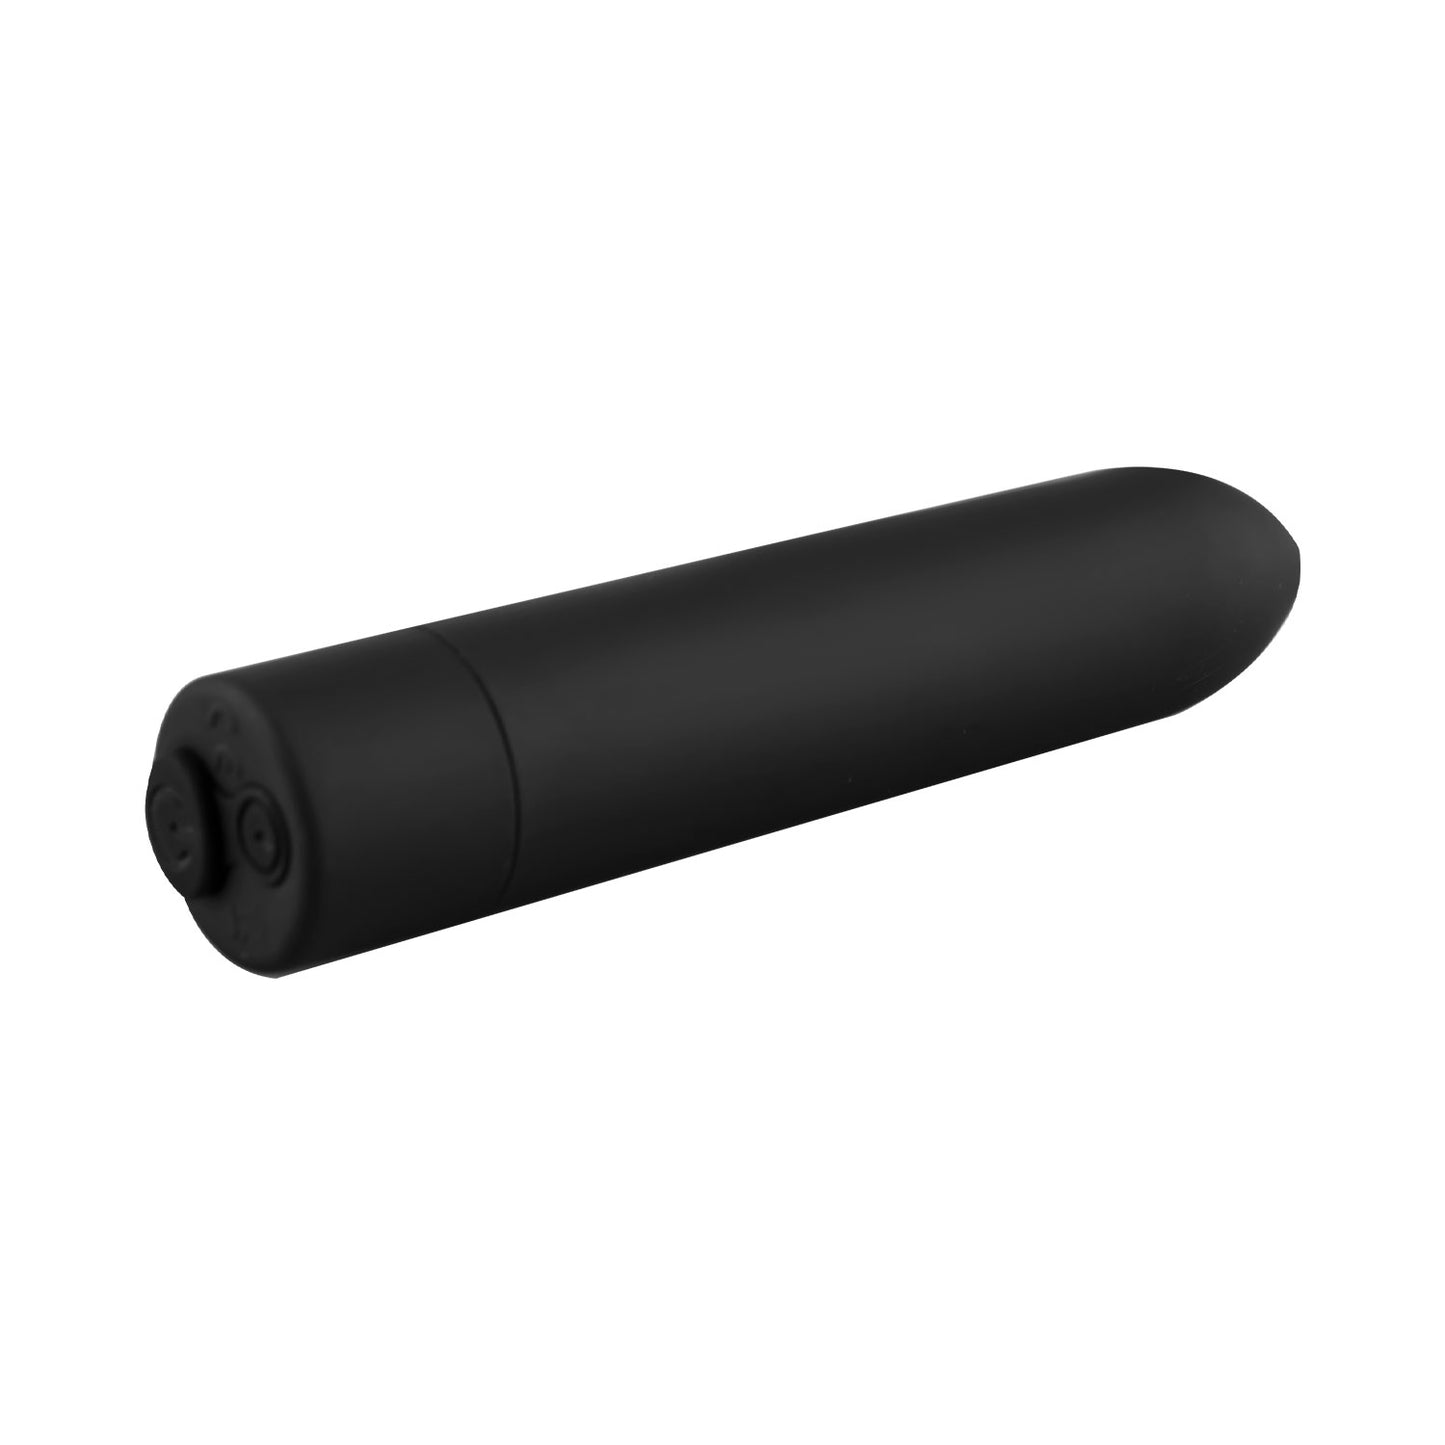 The Horny Company - Bang! Rechargeable Pointed Bullet Vibrator Black